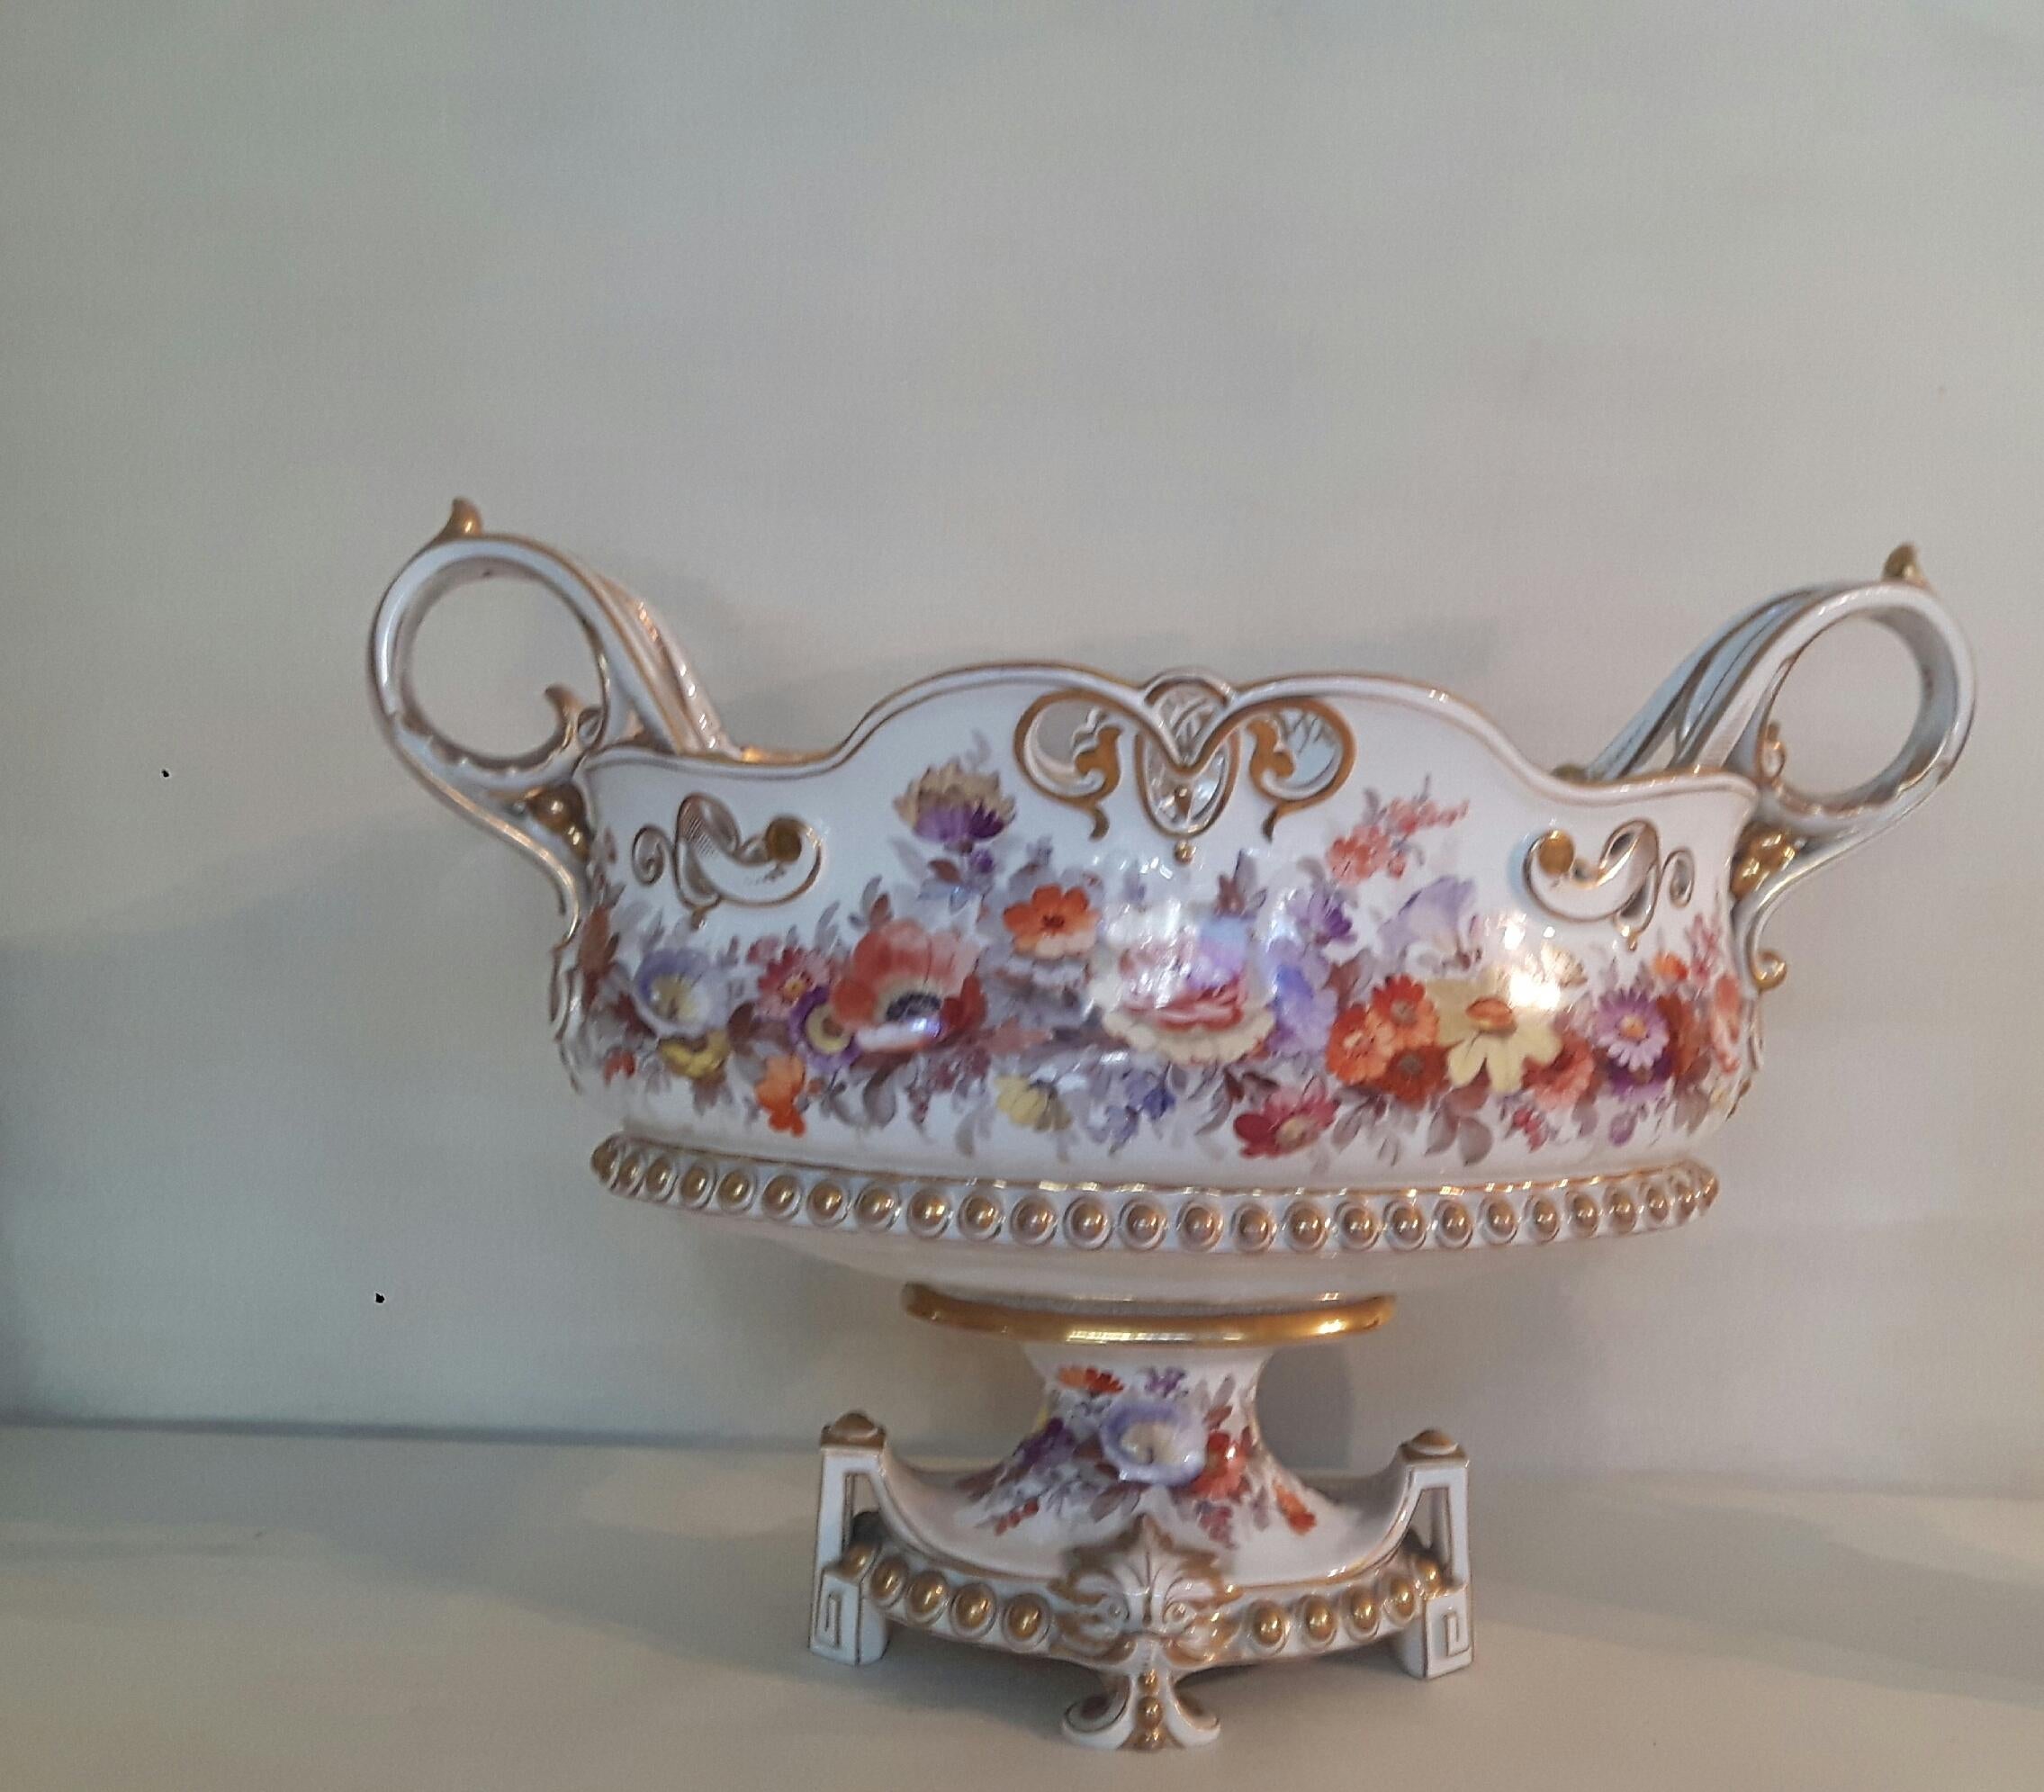 Glazed Early 20th Century Berlin Center Piece For Sale